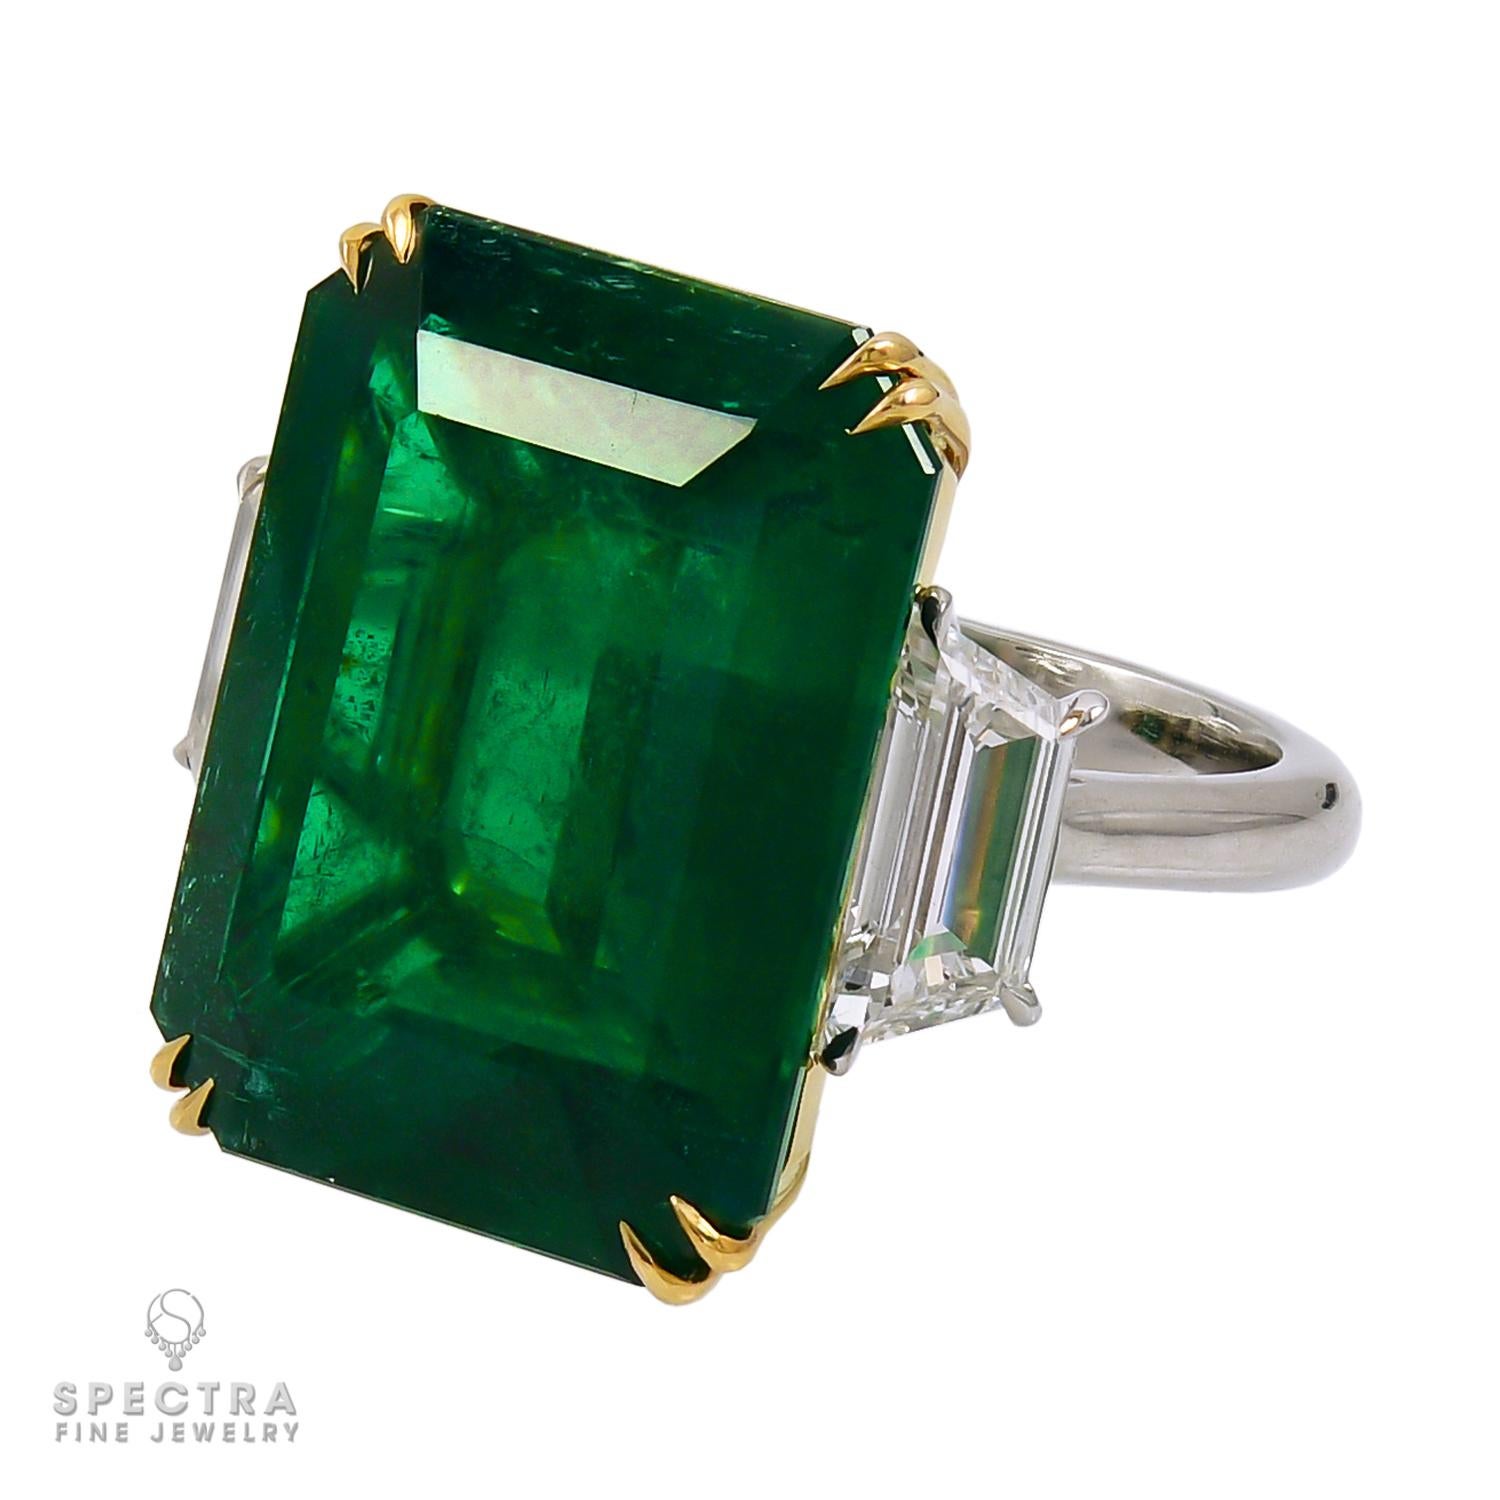 A cocktail ring comprising an emerald-cut green emerald weighing 18.38 carats. 

Certified by C. Dunaigre stating that the emerald is of Zambian origin with minor clarity enhancement. 

Two trapezoid diamonds on both sides:
- 0.73 carat G color, SI1